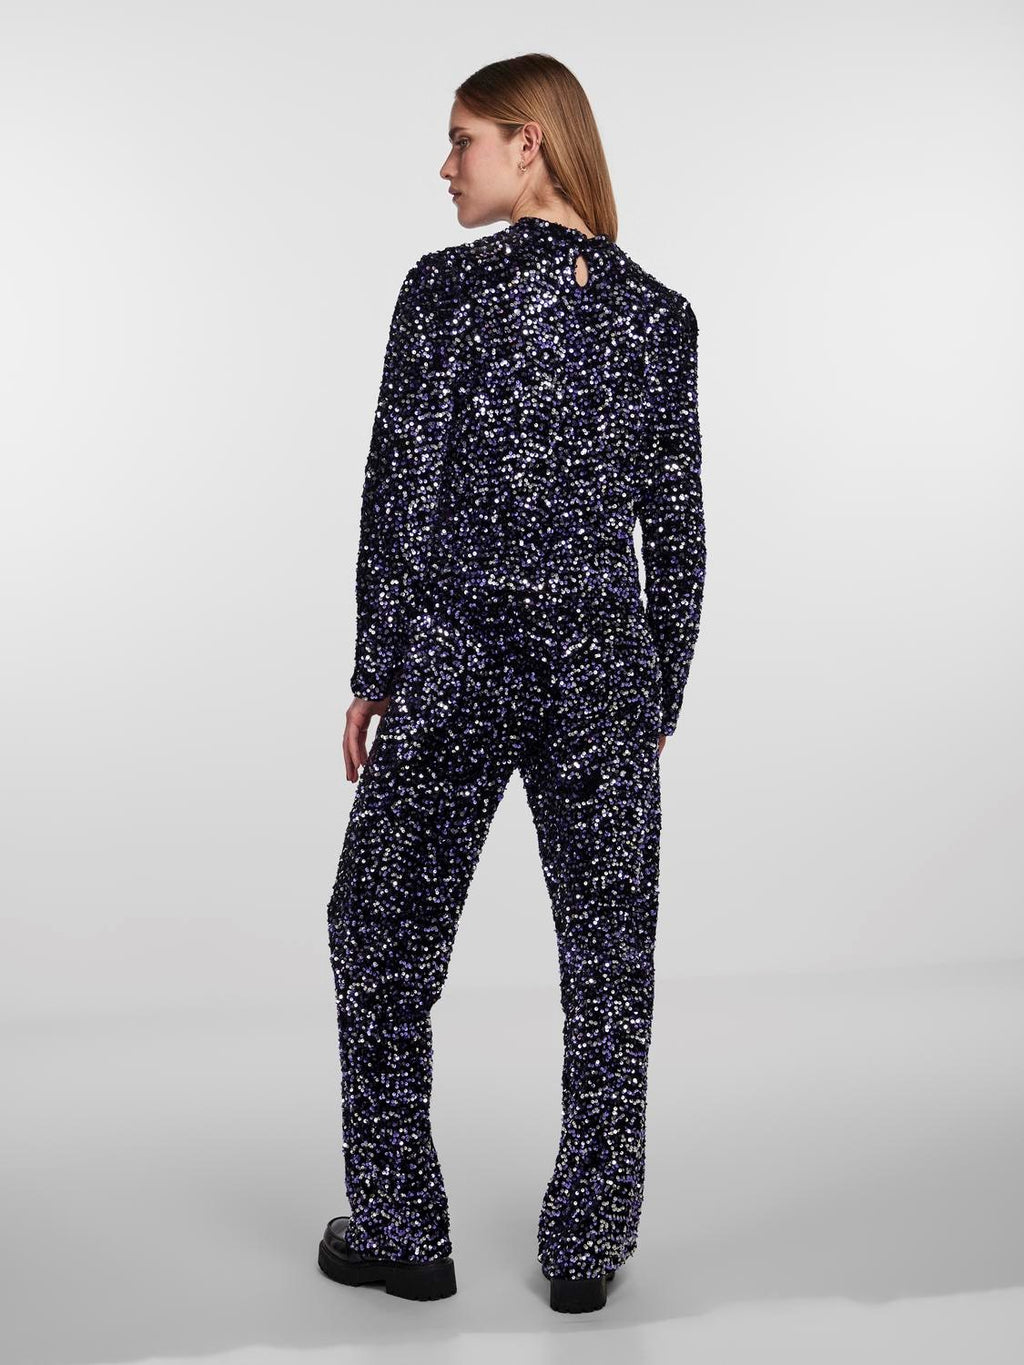 - Stand away collar  - Keyhole back fastening  - Long sleeves  - All-over sequin detail  - Slim fit - Colour: Black/Purple